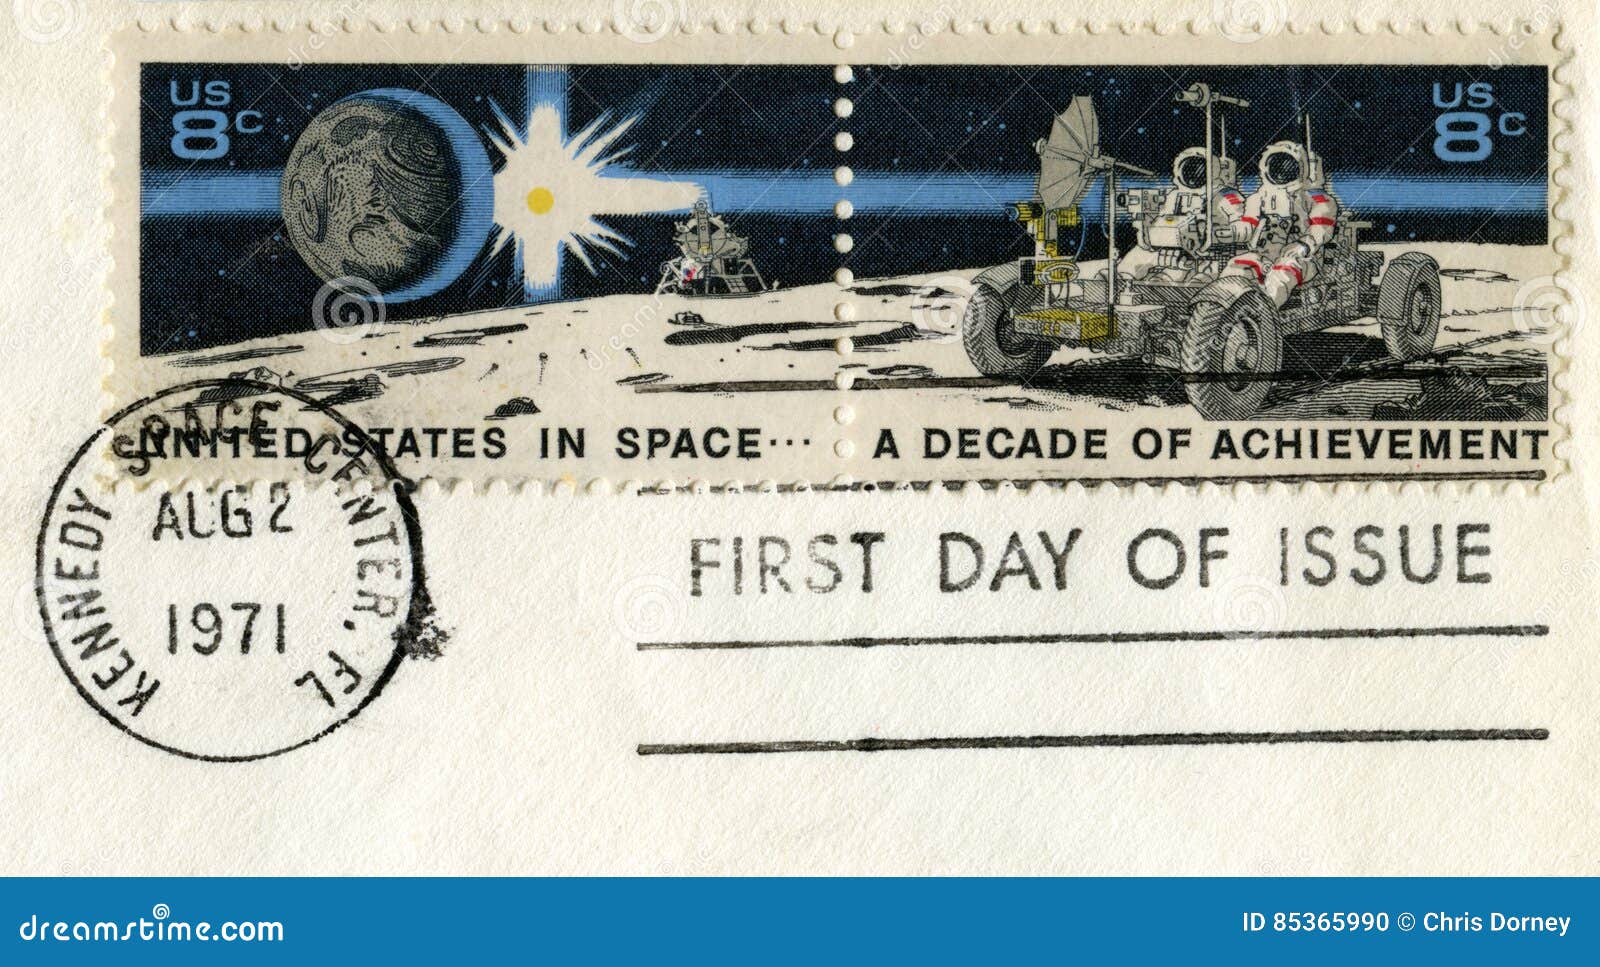 Vintage US Stamps Celebrating a Decade of Space Achievement